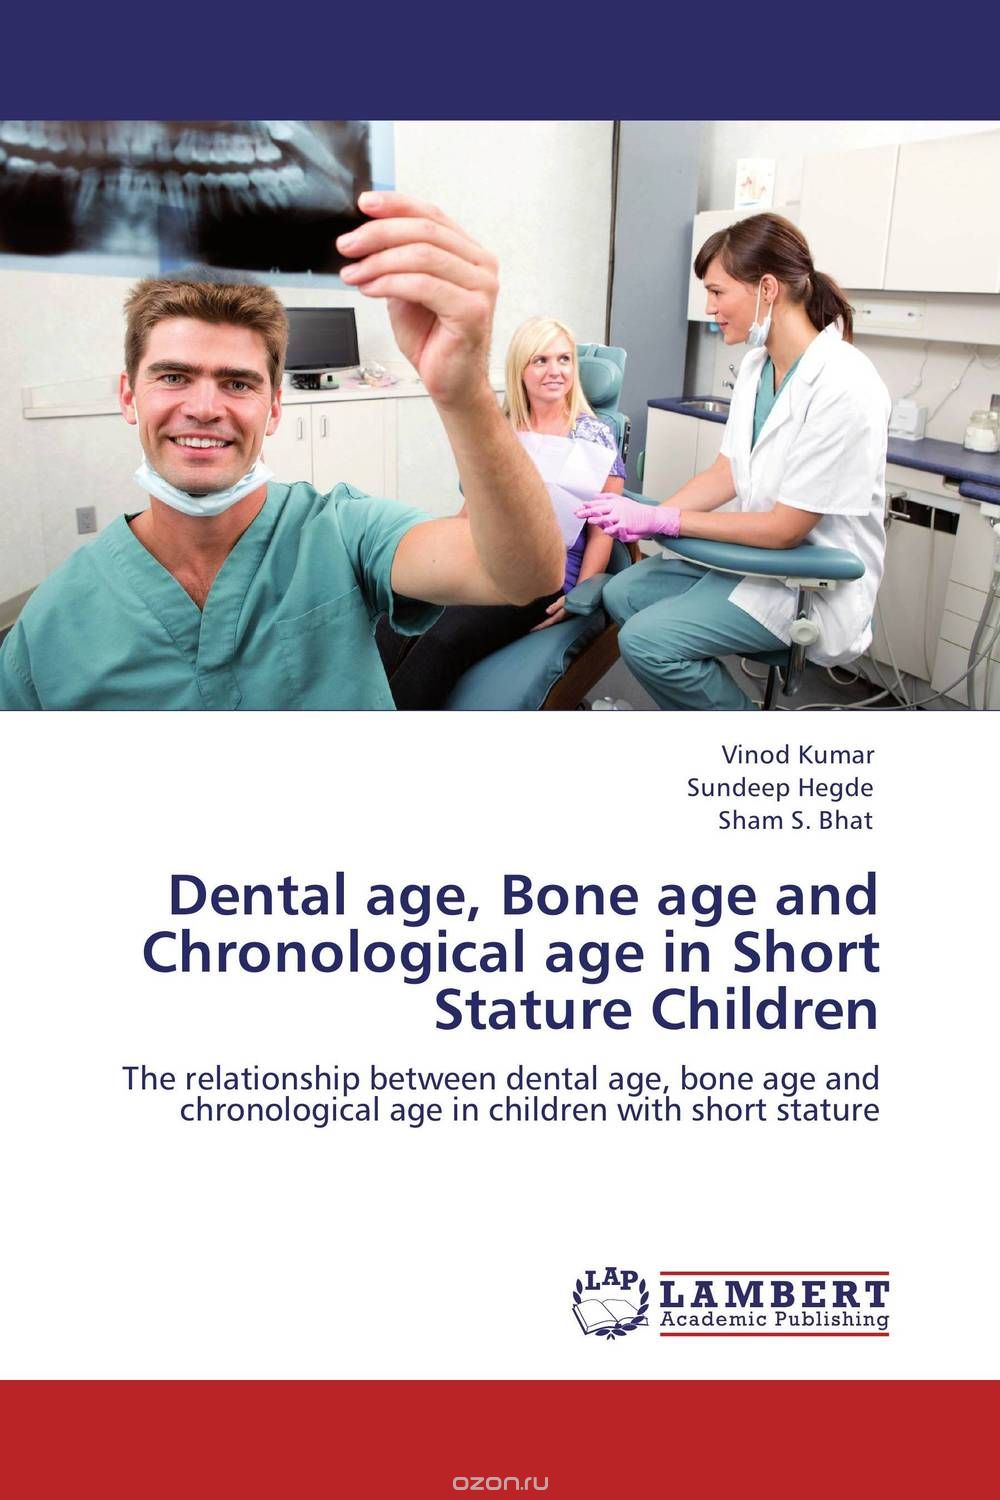 Dental age, Bone age and Chronological age in Short Stature Children